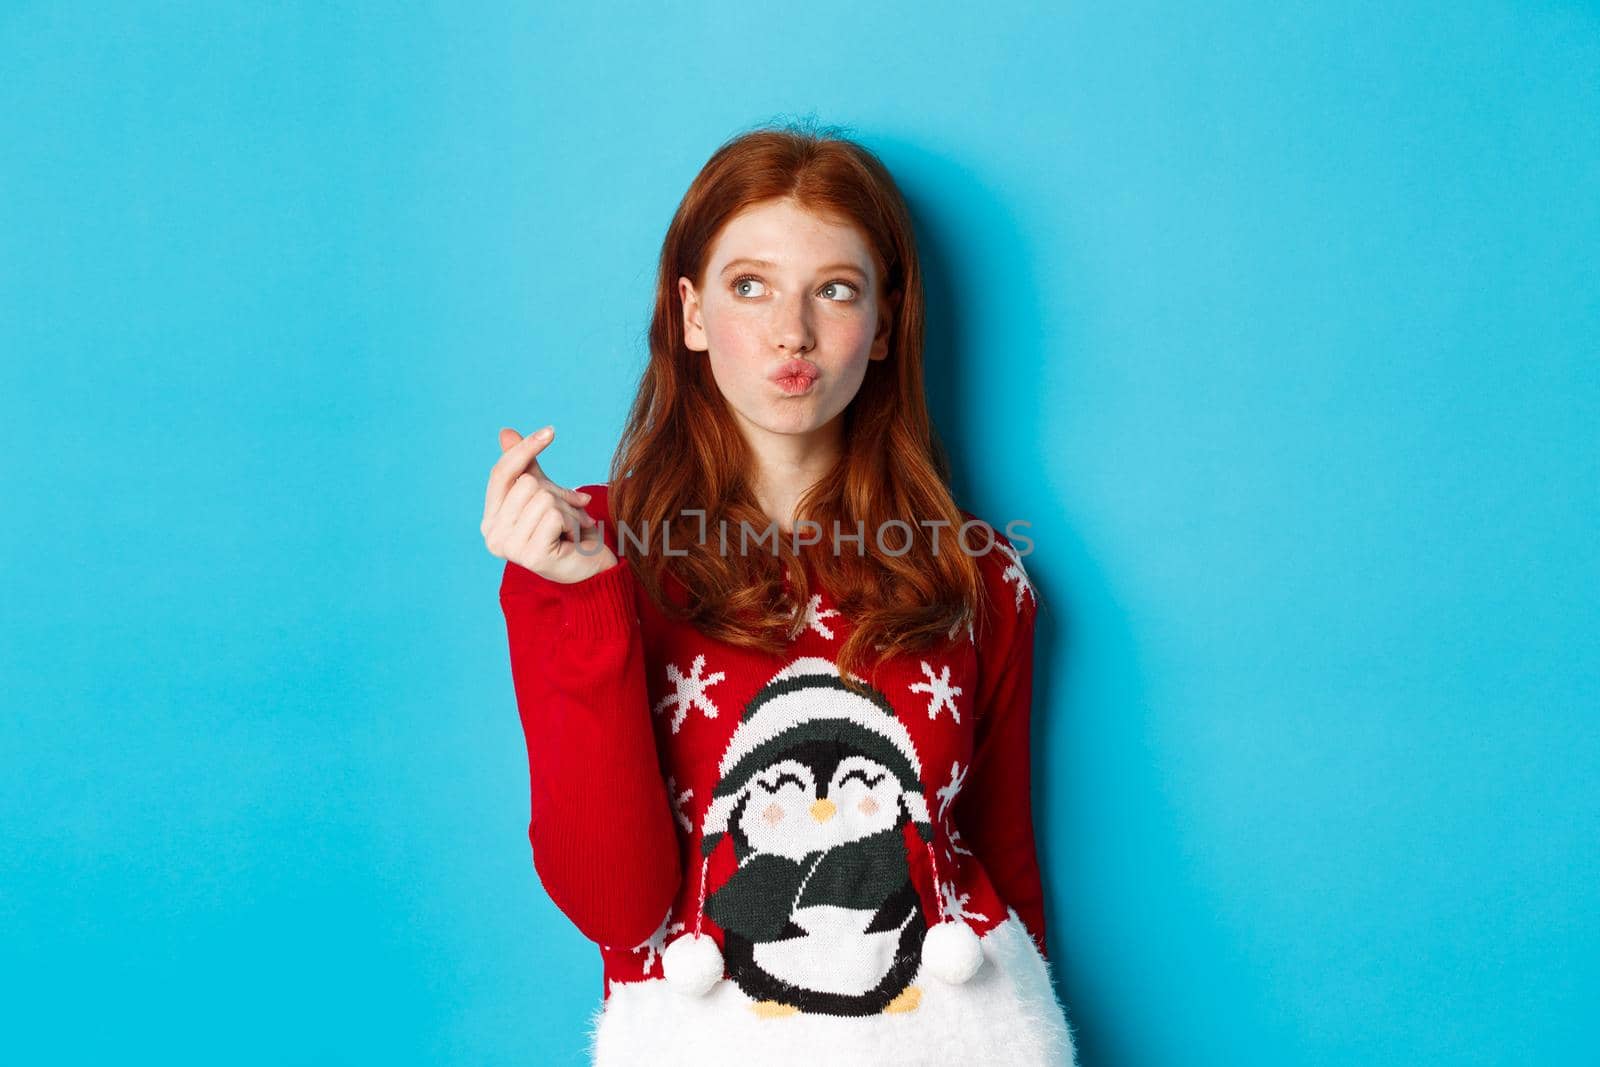 Winter holidays and Christmas Eve concept. Lovely redhead woman in xmas sweater, showing heart sign and thinking, looking upper left corner at logo, blue background.